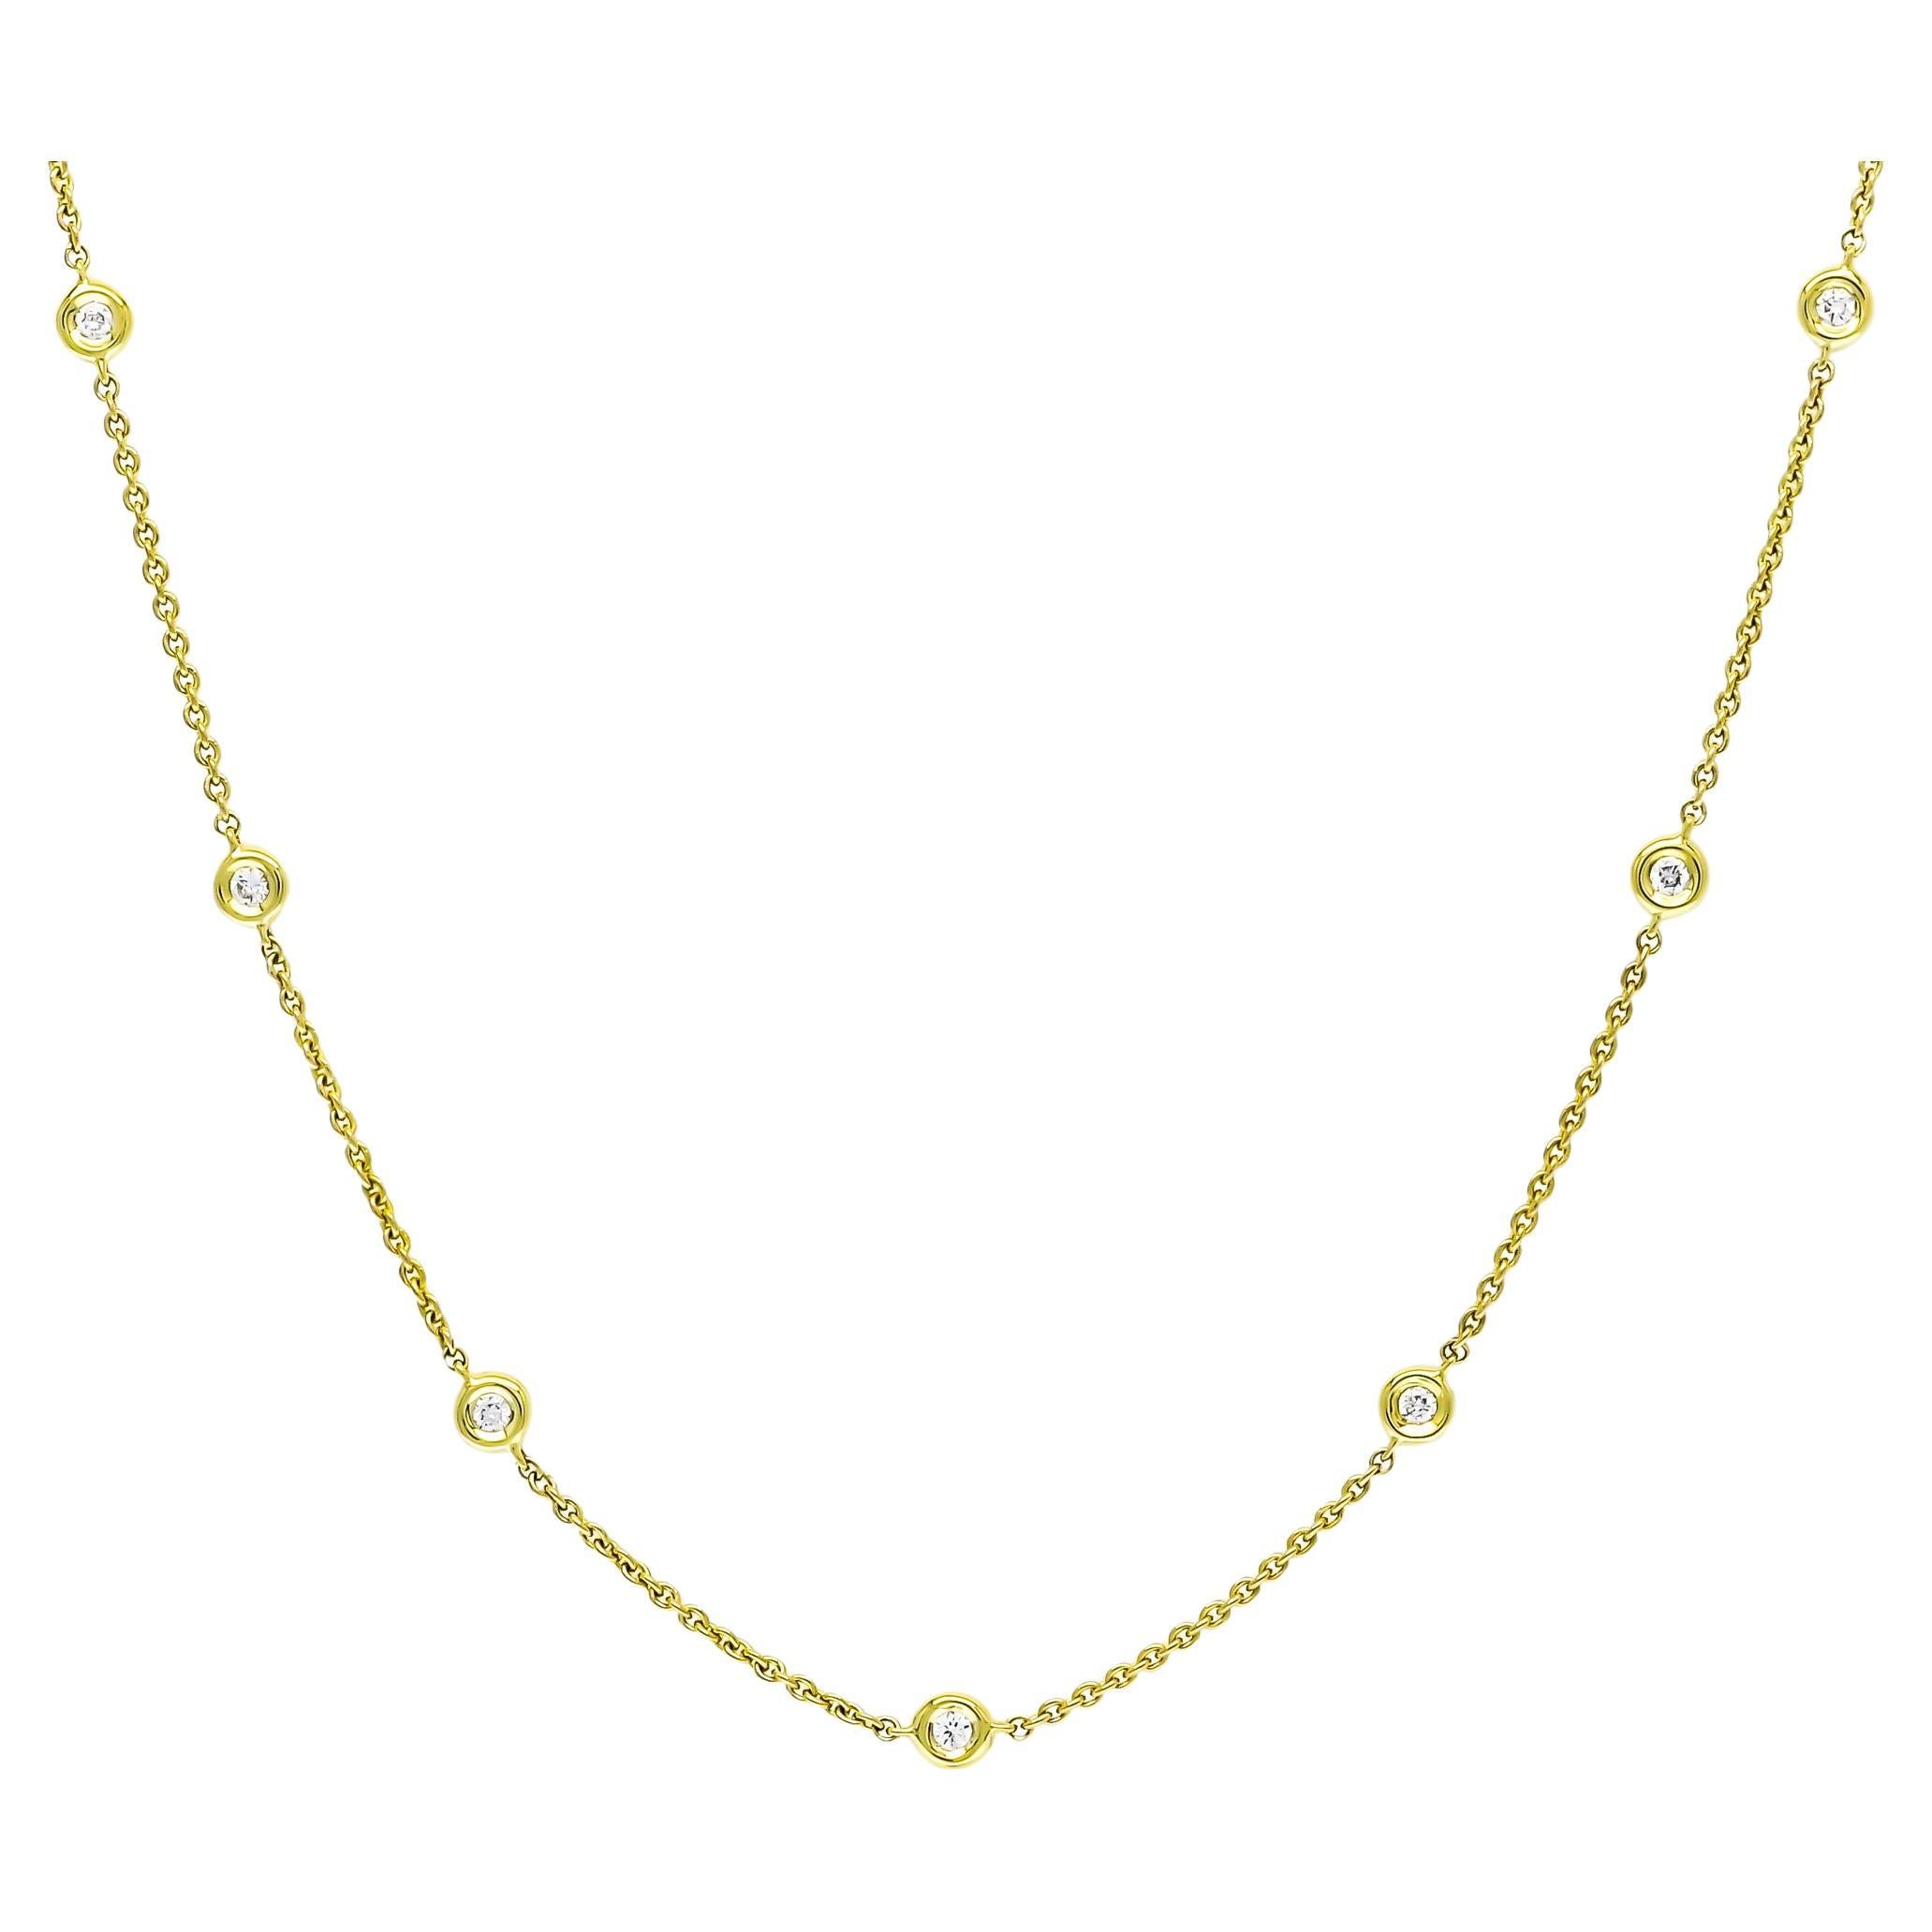  Natural Diamond Chain Necklace 0.35 cts 18 Karat Yellow Gold Chain Necklace